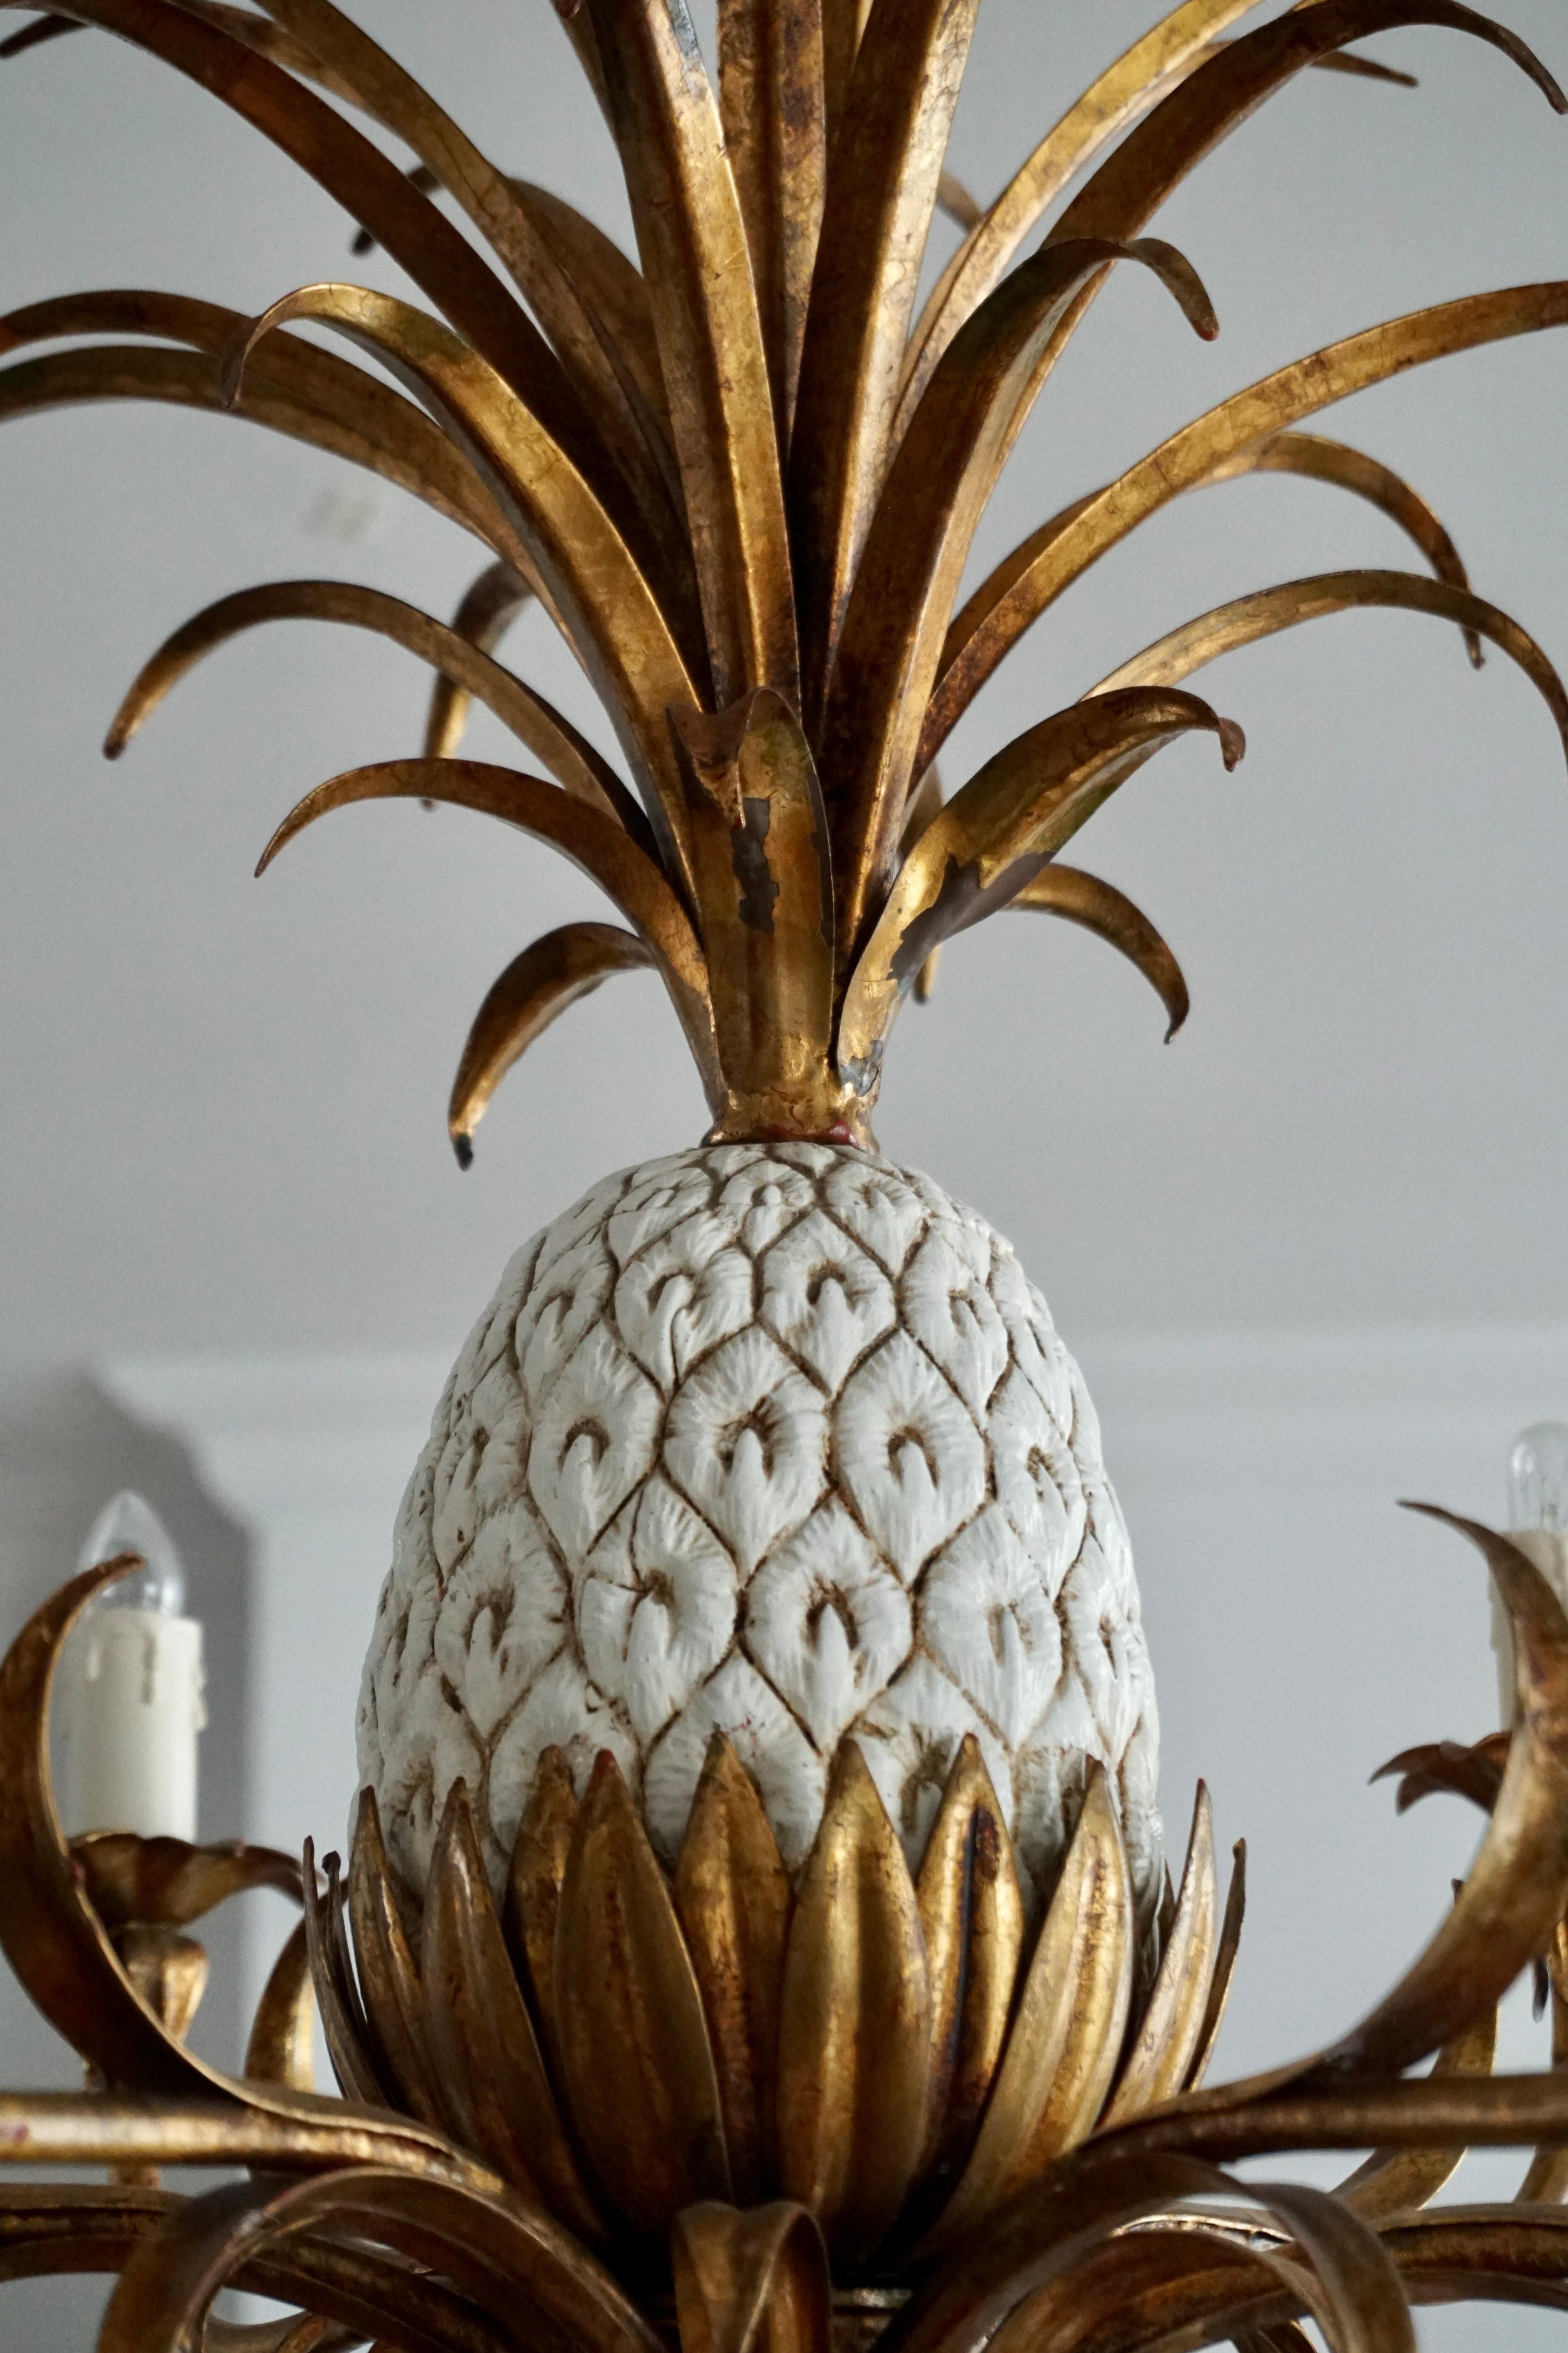 Italian Ceramic and Brass Pineapple Chandelier, circa 1970s For Sale 2